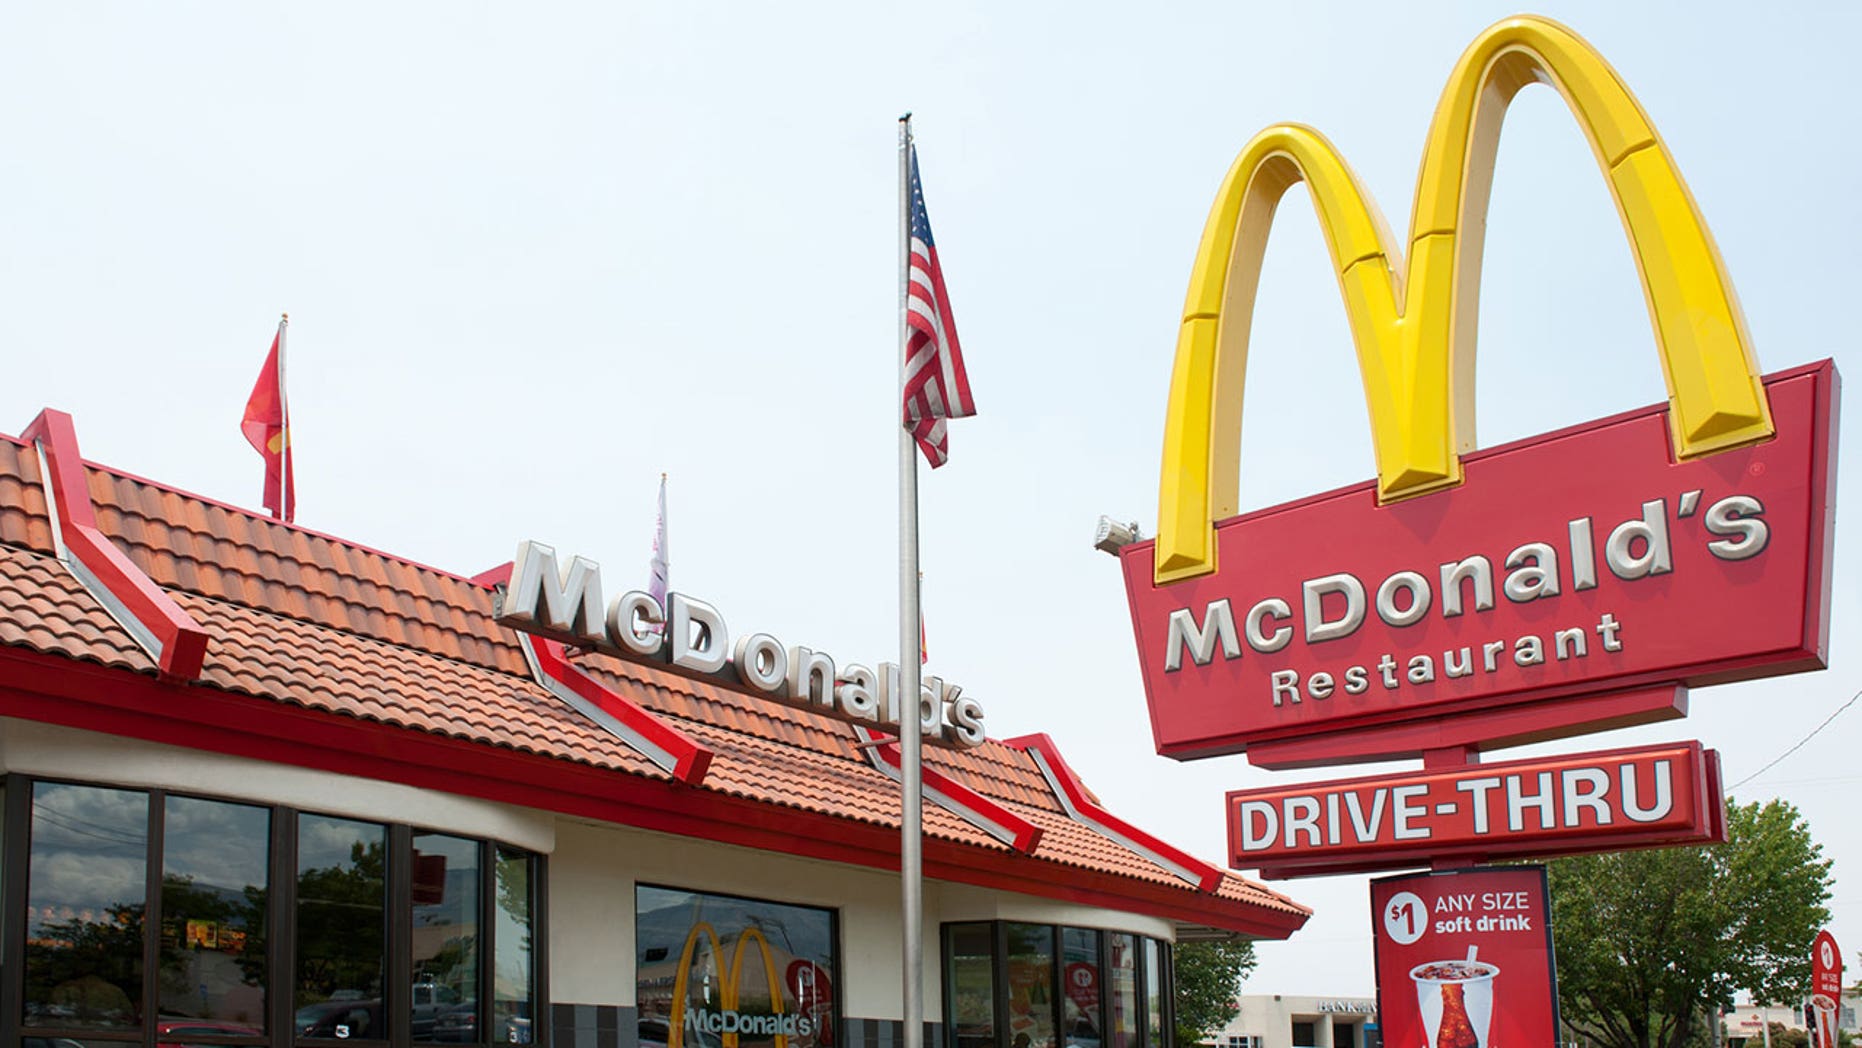 McDonald's employees are being pranked at the drive-thru window by Travis Scott fans in a new TikTok trend. (iStock)